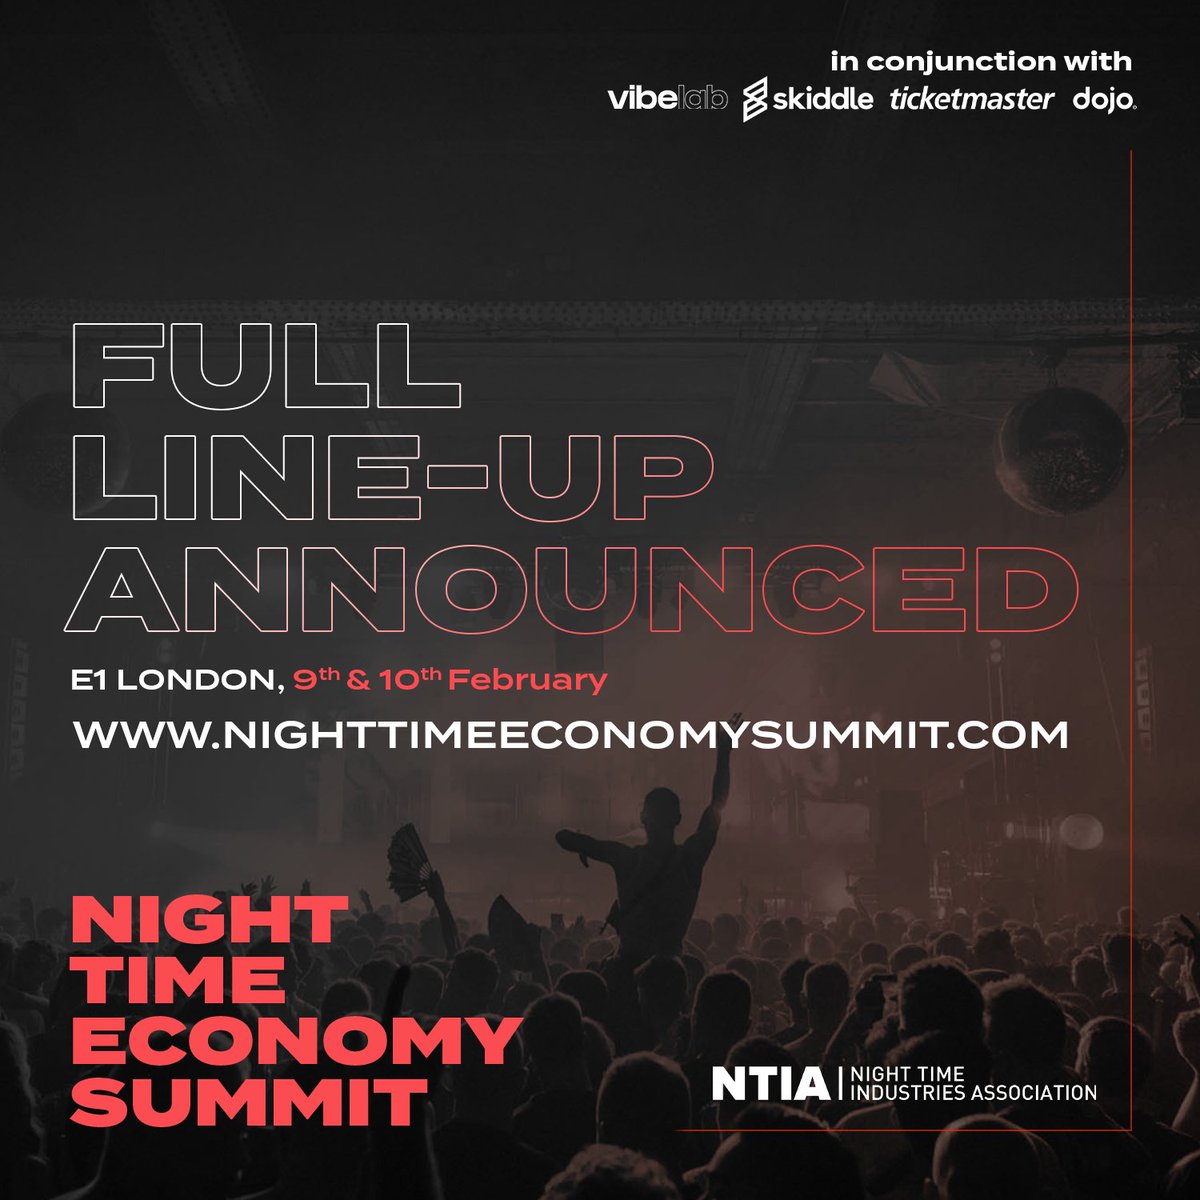 The first day of our NTIA Night-Time Economy Summit has sold out with only limited ticket availability for Friday. Get them whilst you still can! @VibeLabNetwork @E1London @TicketmasterUK @dojo_business_ @skiddle @NDMLInsurance @labelworx @djmonitor nighttimeeconomysummit.com